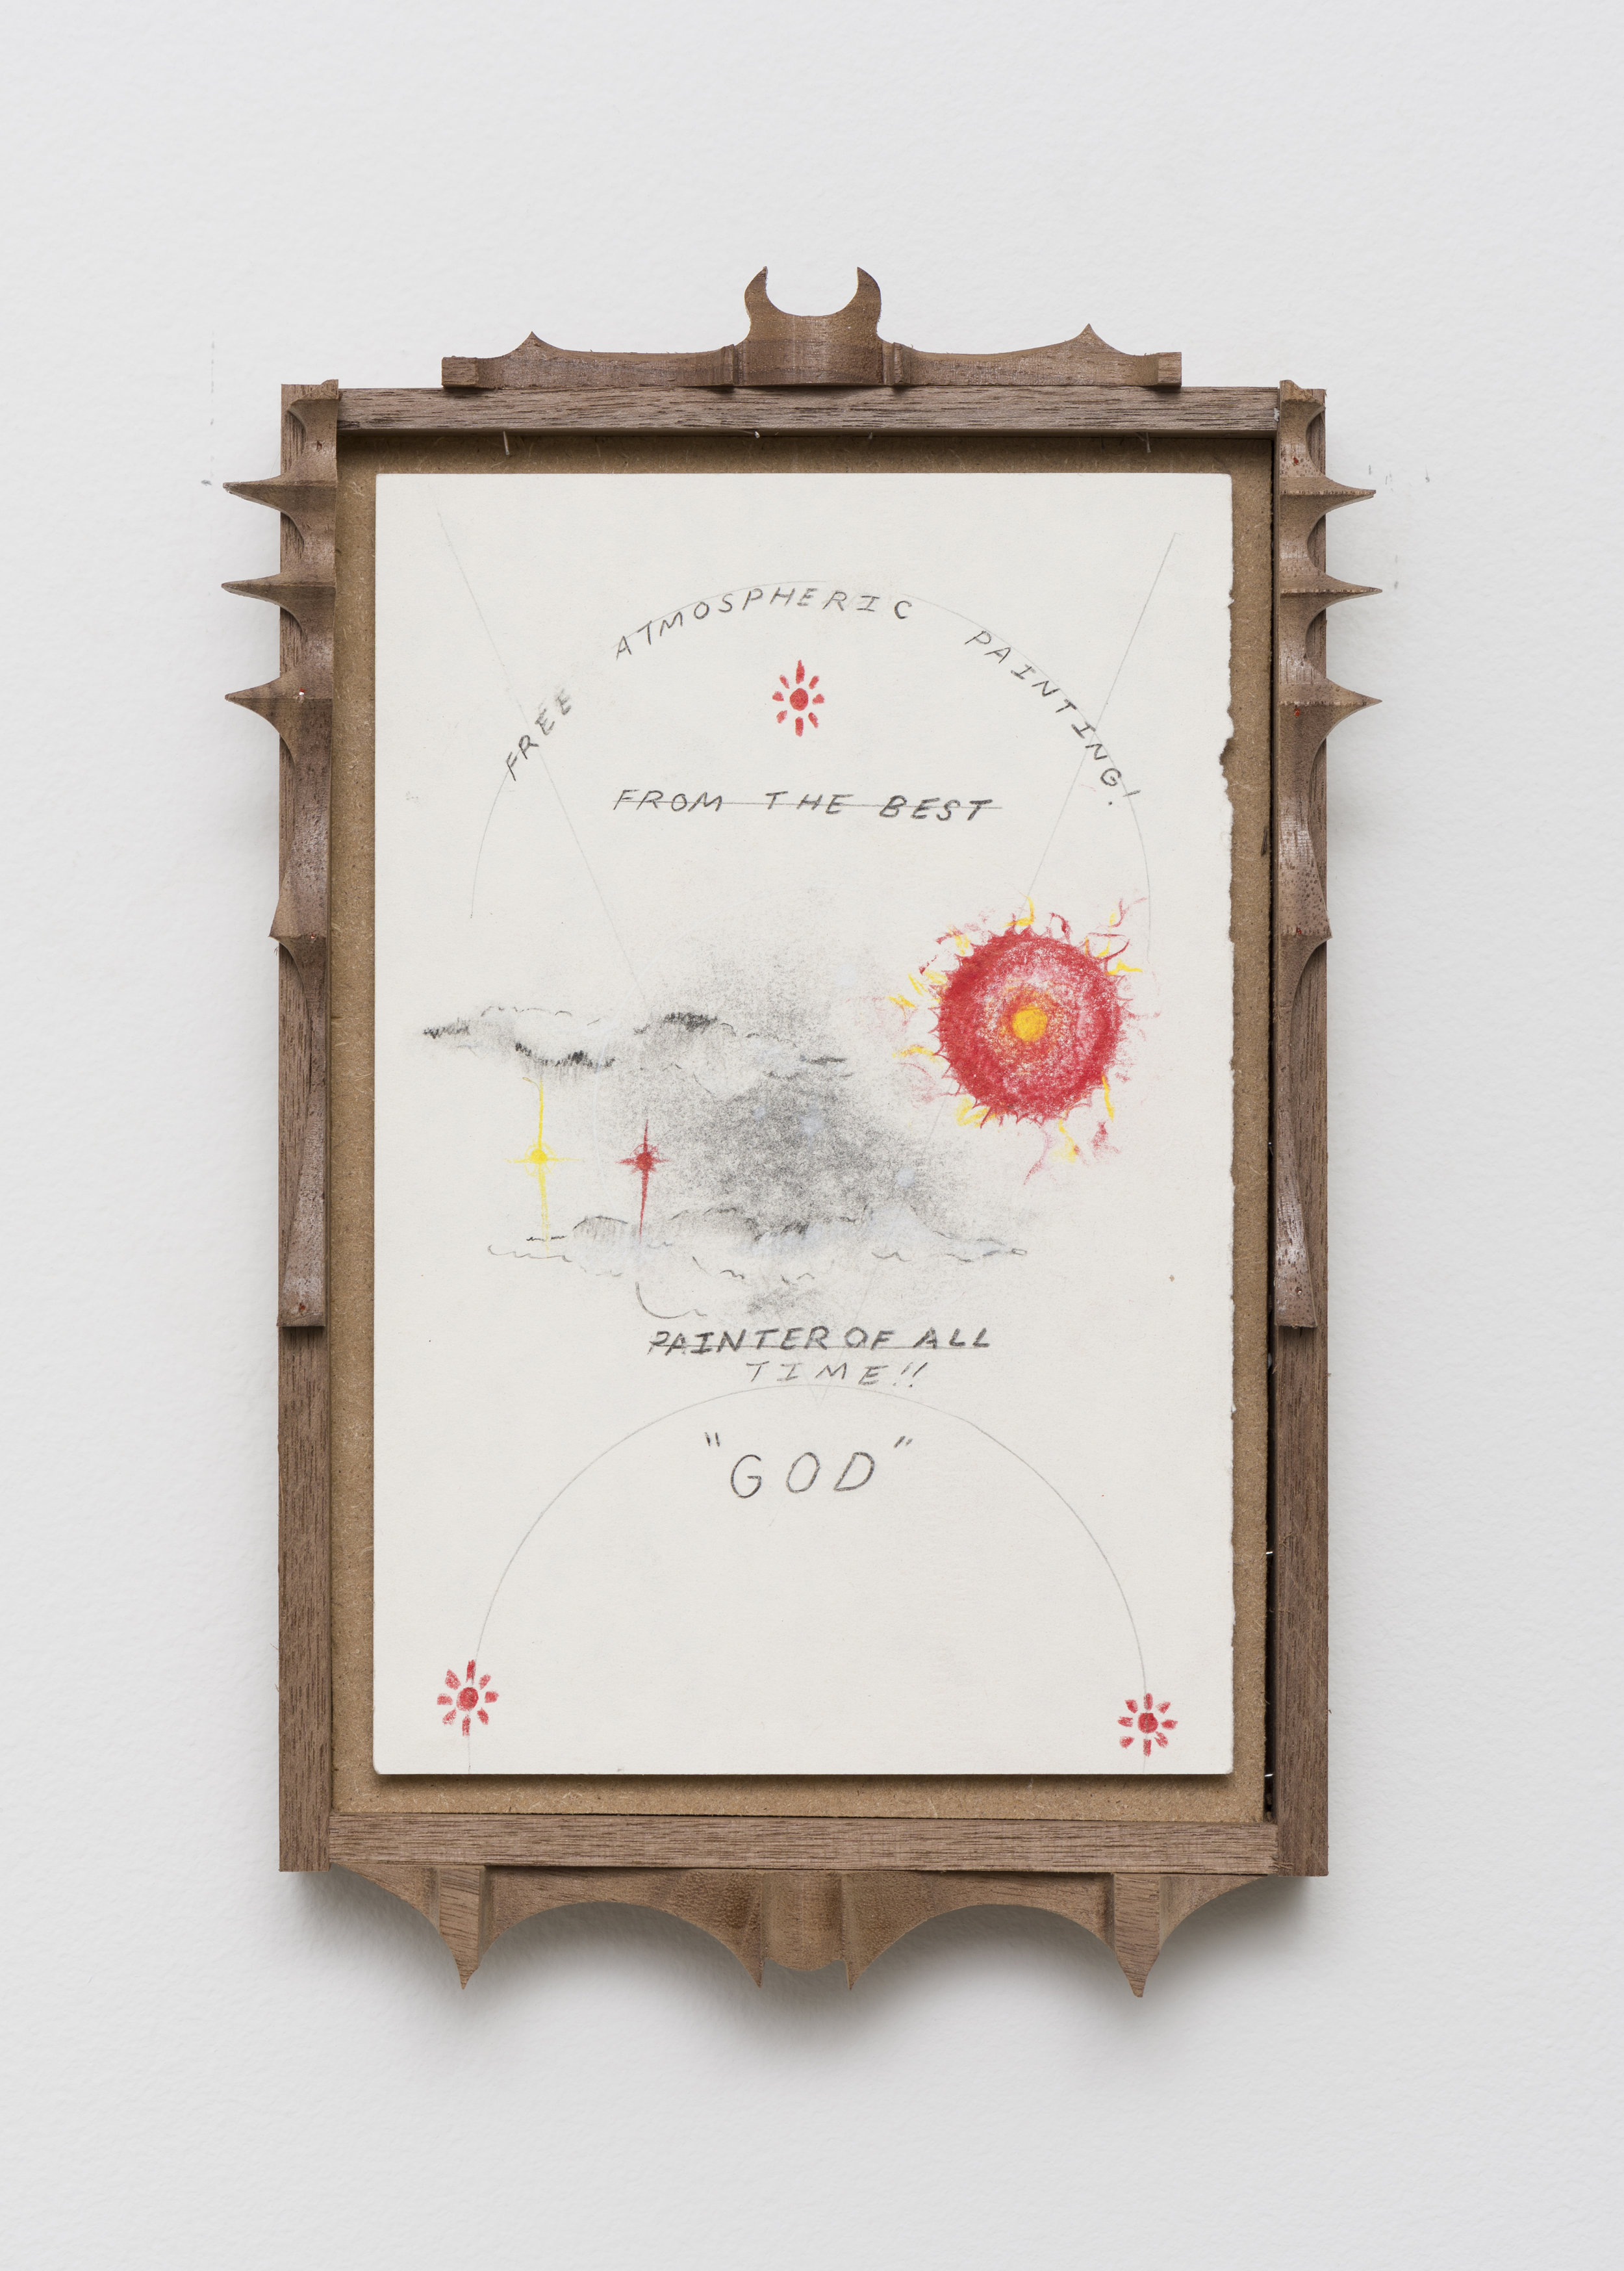   Harry Gould Harvey IV  Look Up! Free Atmospheric Painting   2019 Pencil on paper, carved walnut frame 11 x 6.75 in     